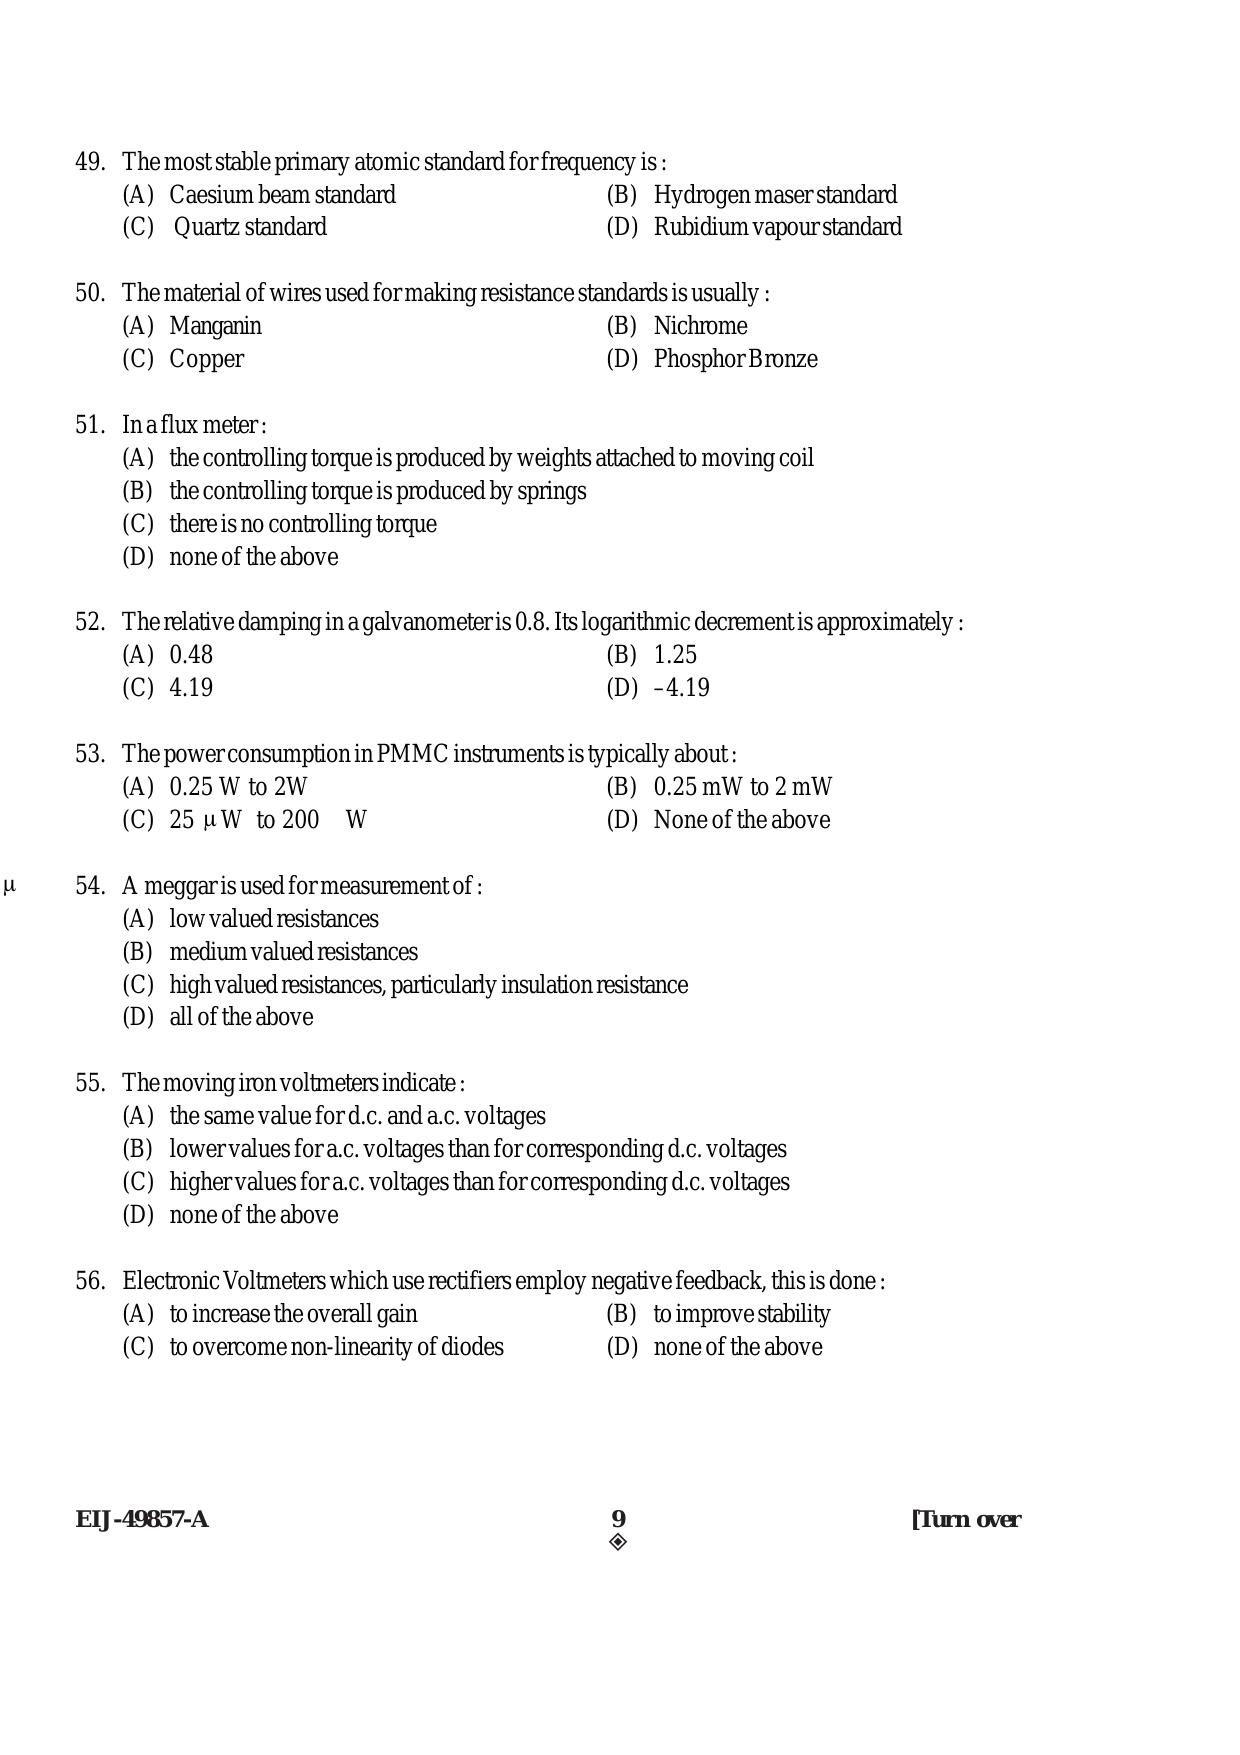 SEBI Officer Electrical Engineering Previous Paper - Page 9